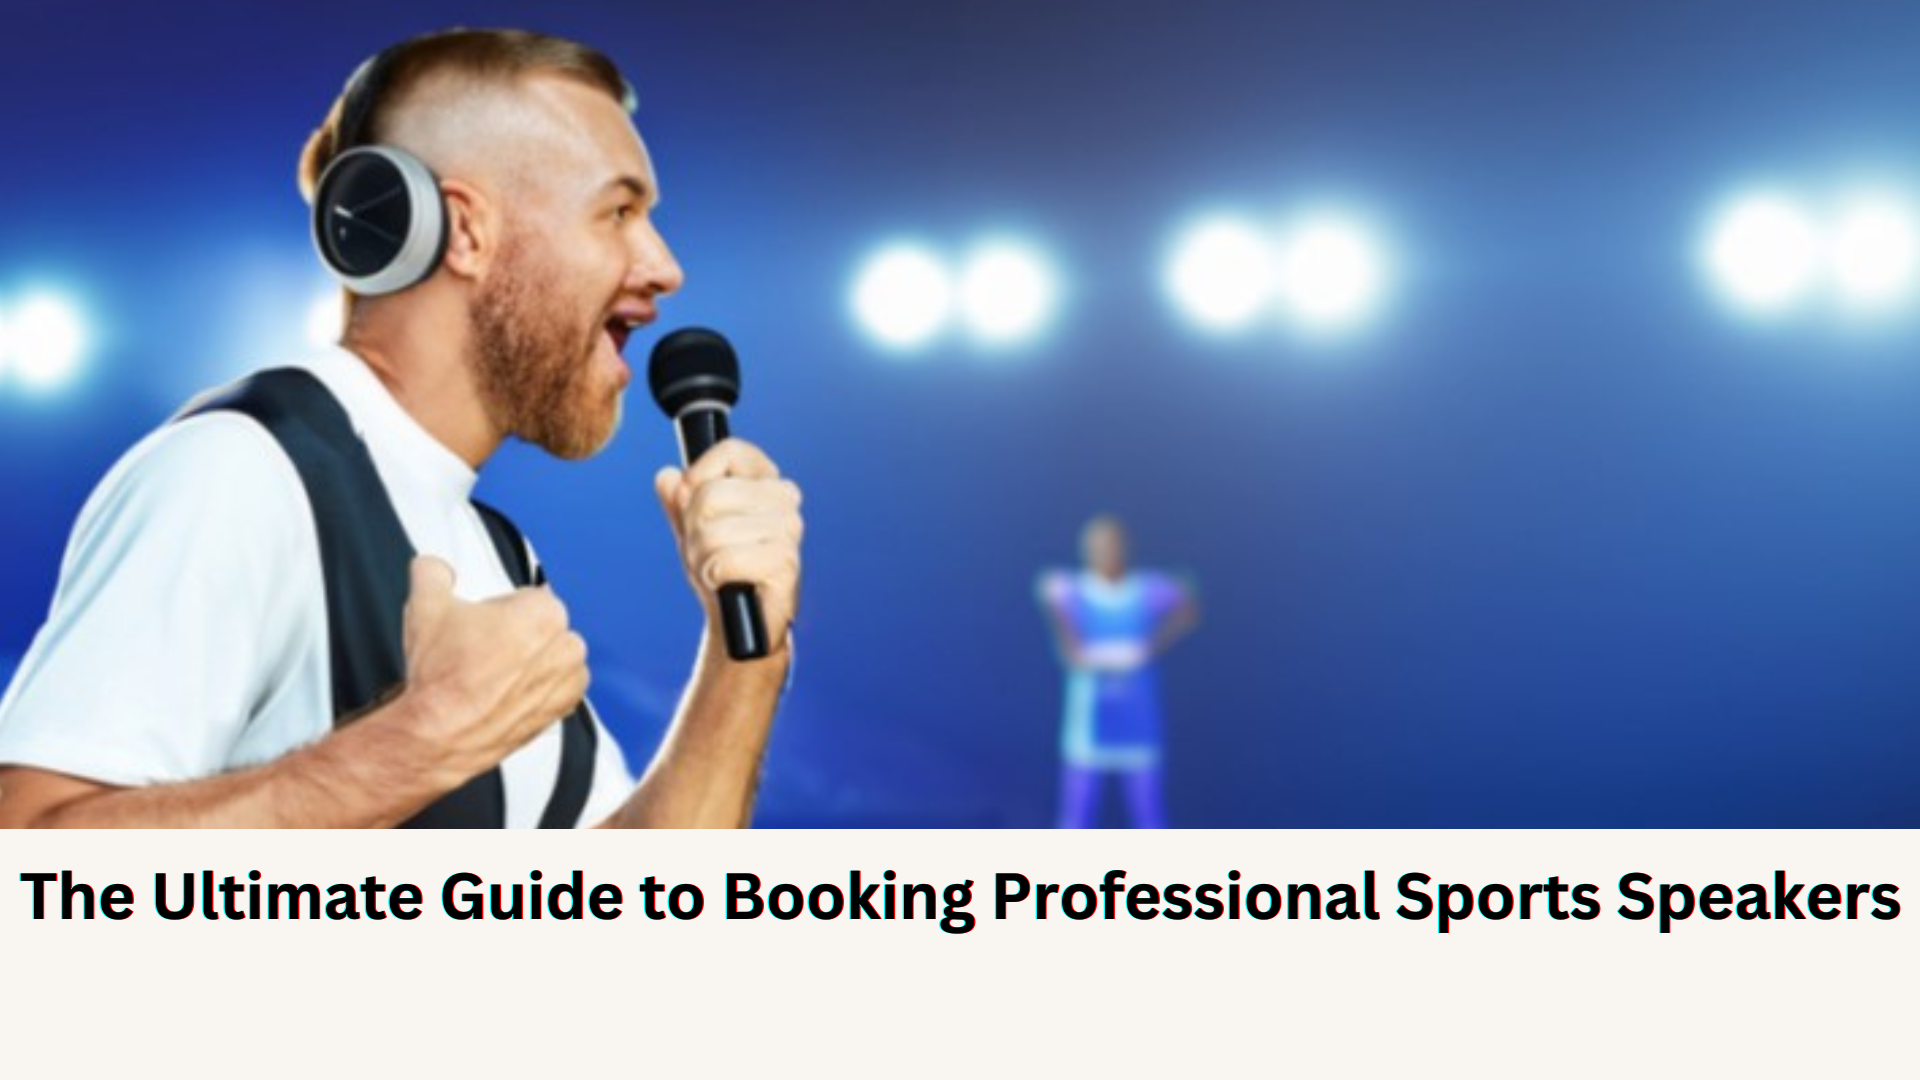 Book Professional Sports Speaker and Inspire Your Audience